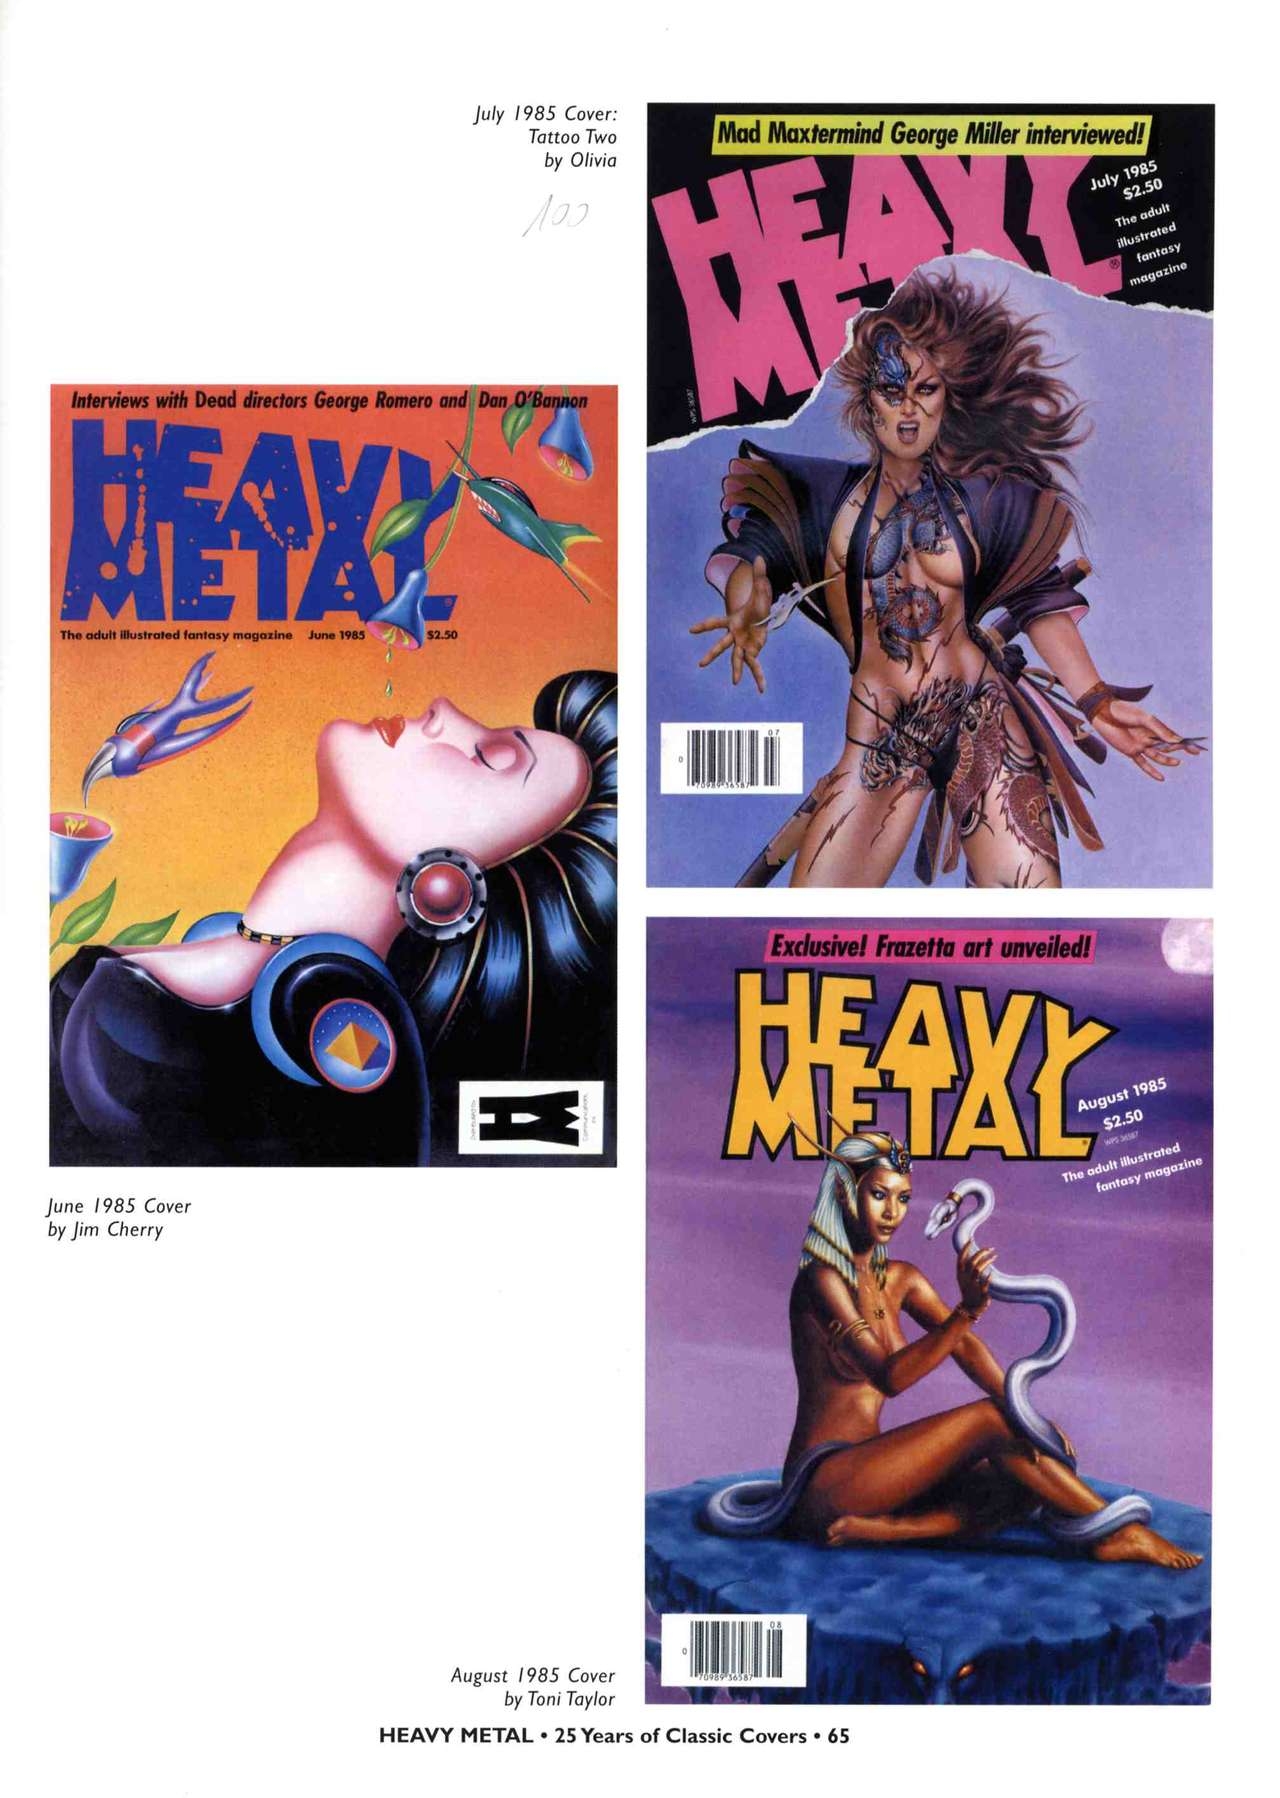 HEAVY METAL 25 Years of Classic Covers 70